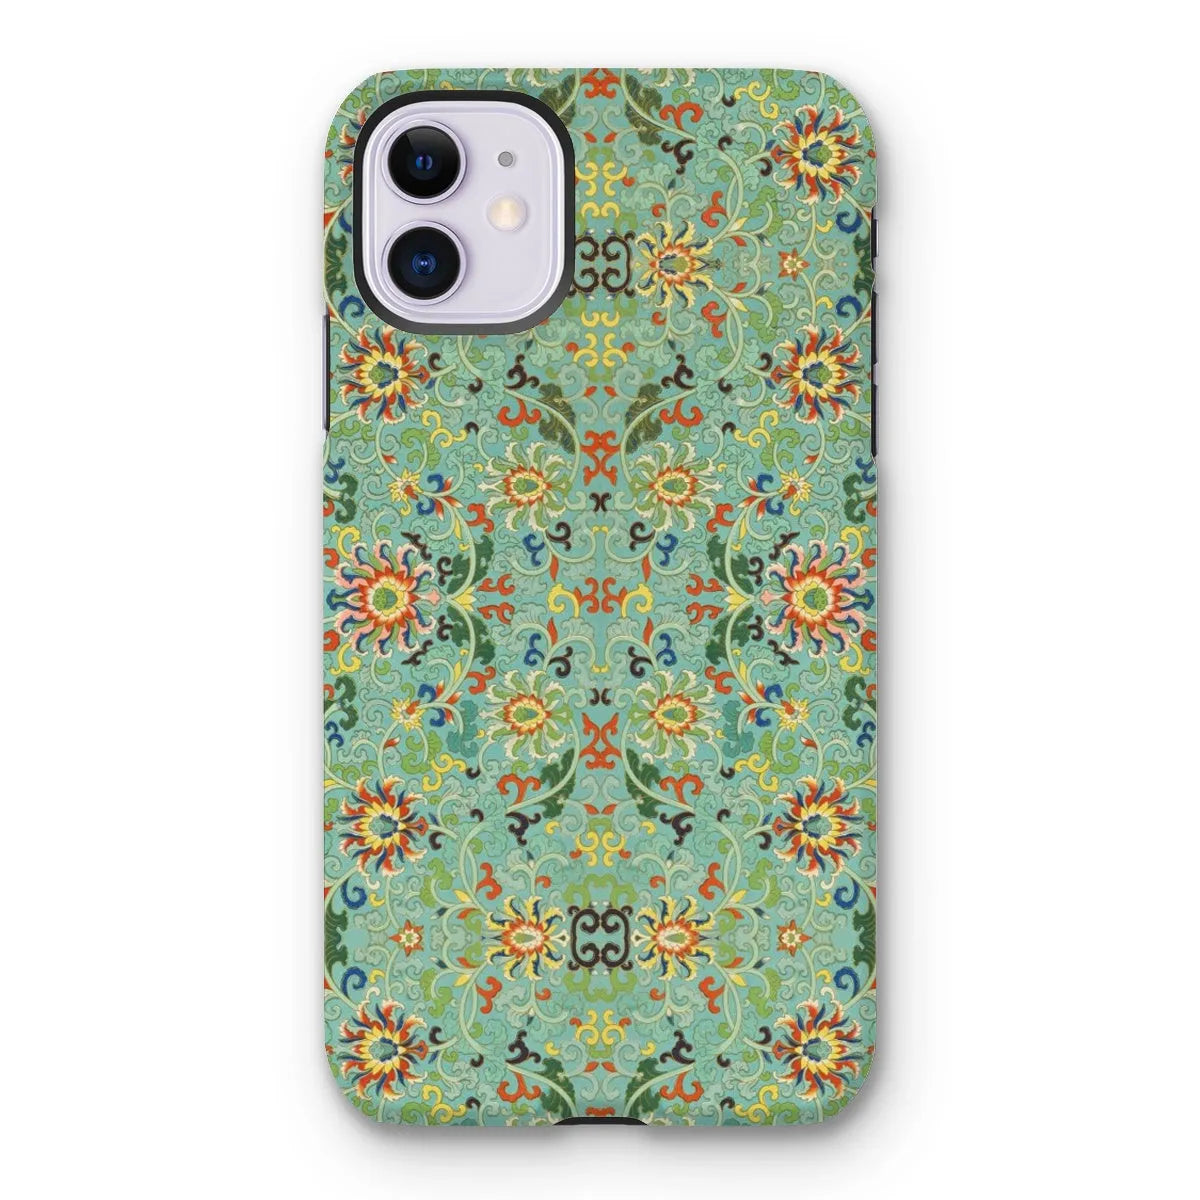 Lotus Candy - Chinese Aesthetic Pattern Art Phone Case - Iphone 11 / Matte - Mobile Phone Cases - Aesthetic Art